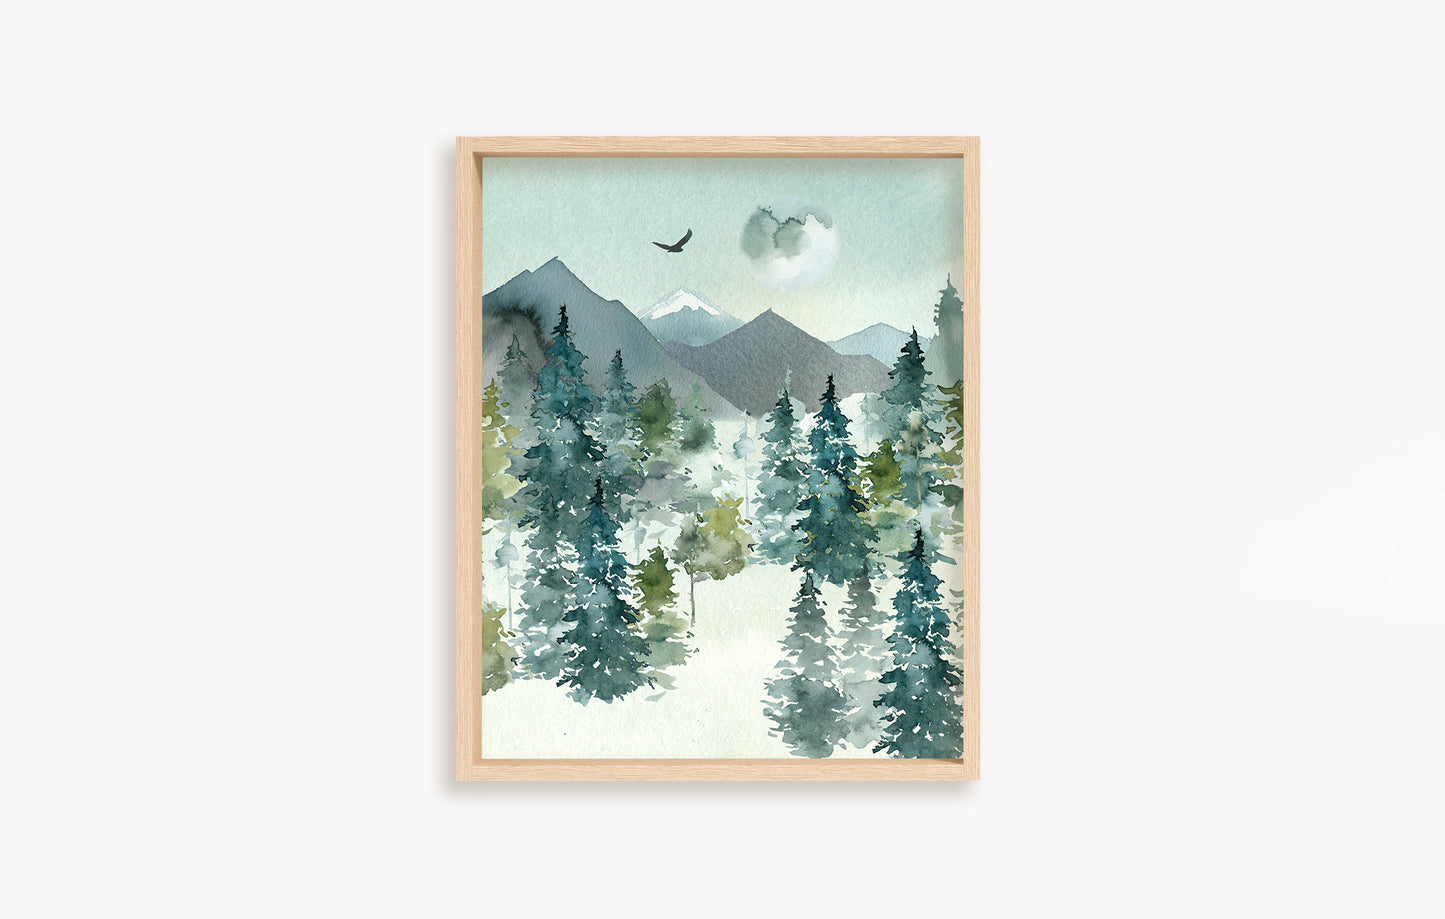 Forest Printable Wall Art, Woodland Nursery Prints Set of 3 - Majestic Forest